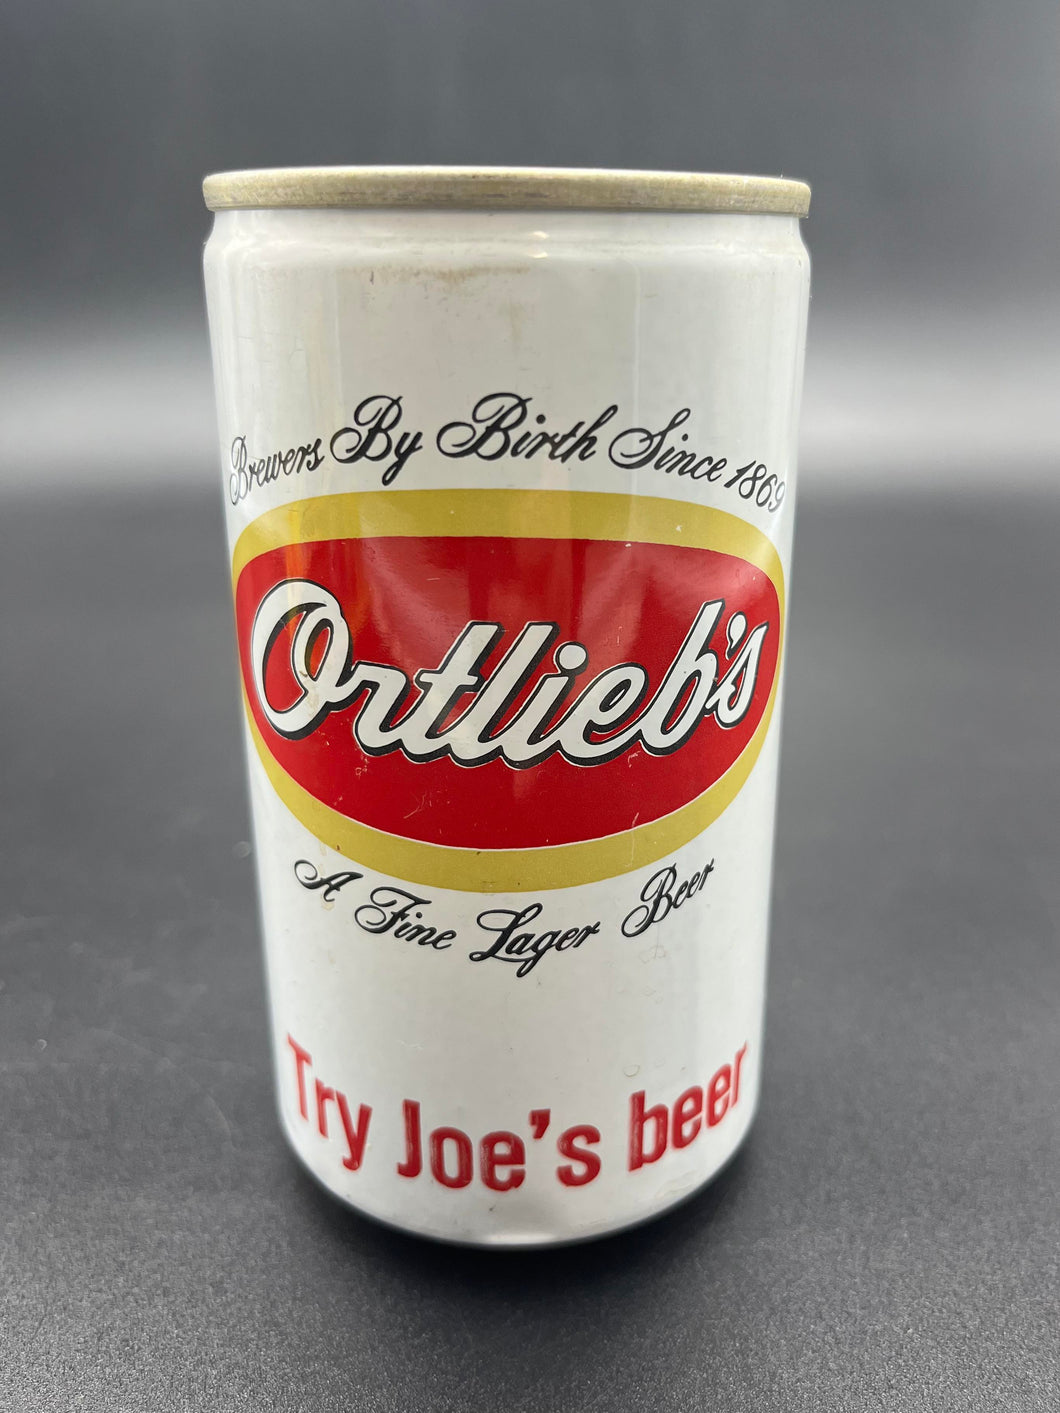 Ortlieb's Beer Can - Full